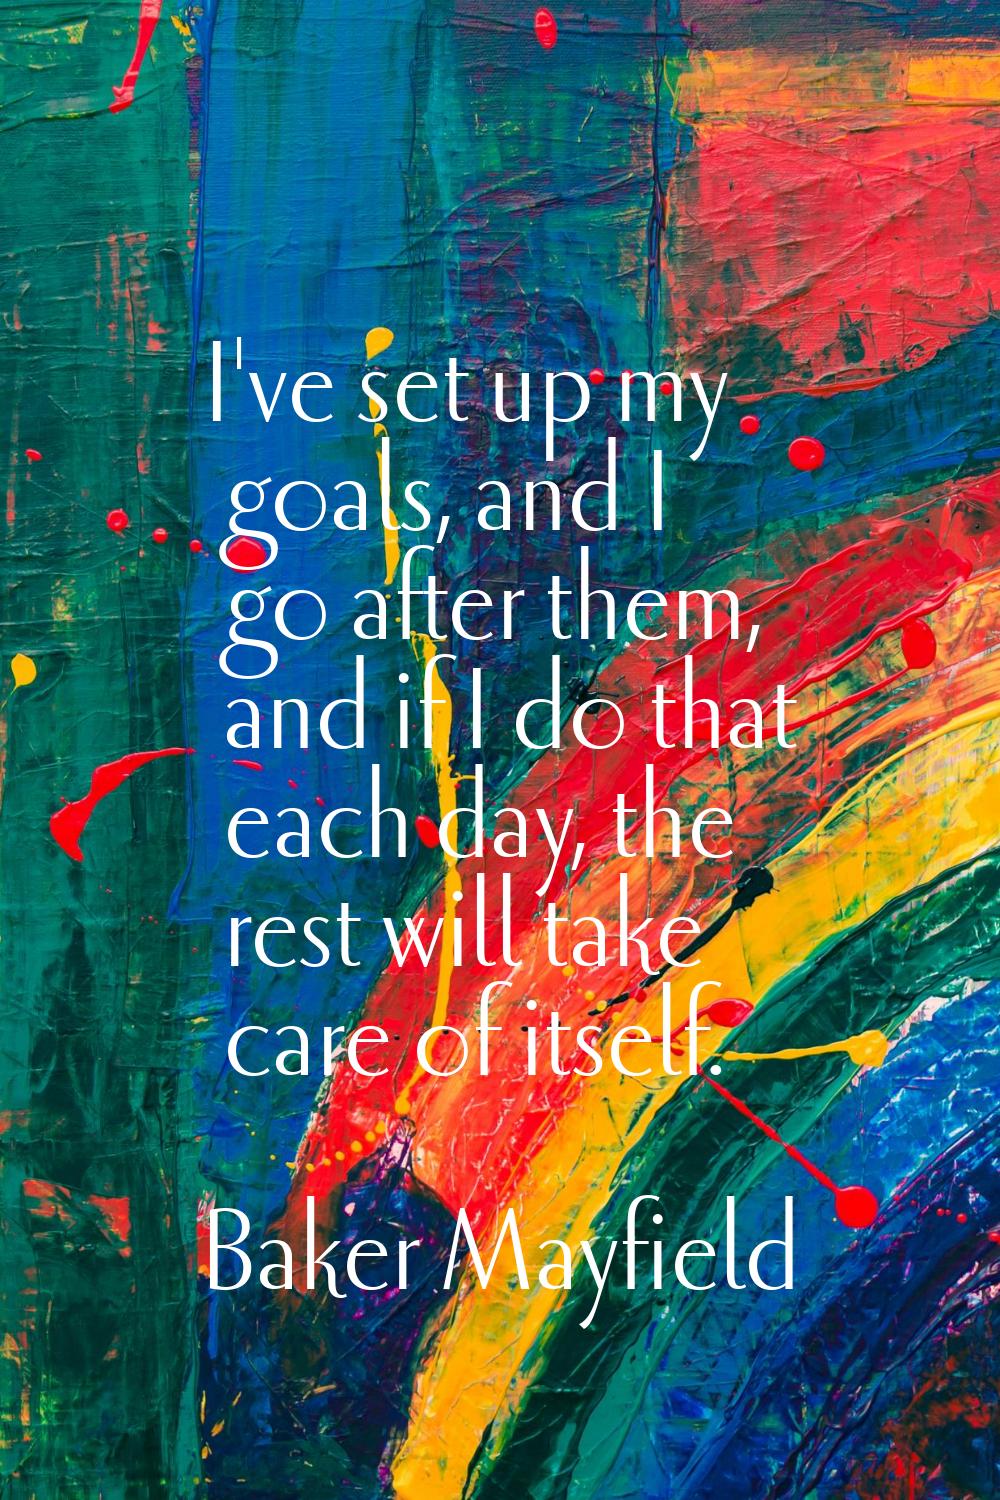 I've set up my goals, and I go after them, and if I do that each day, the rest will take care of it